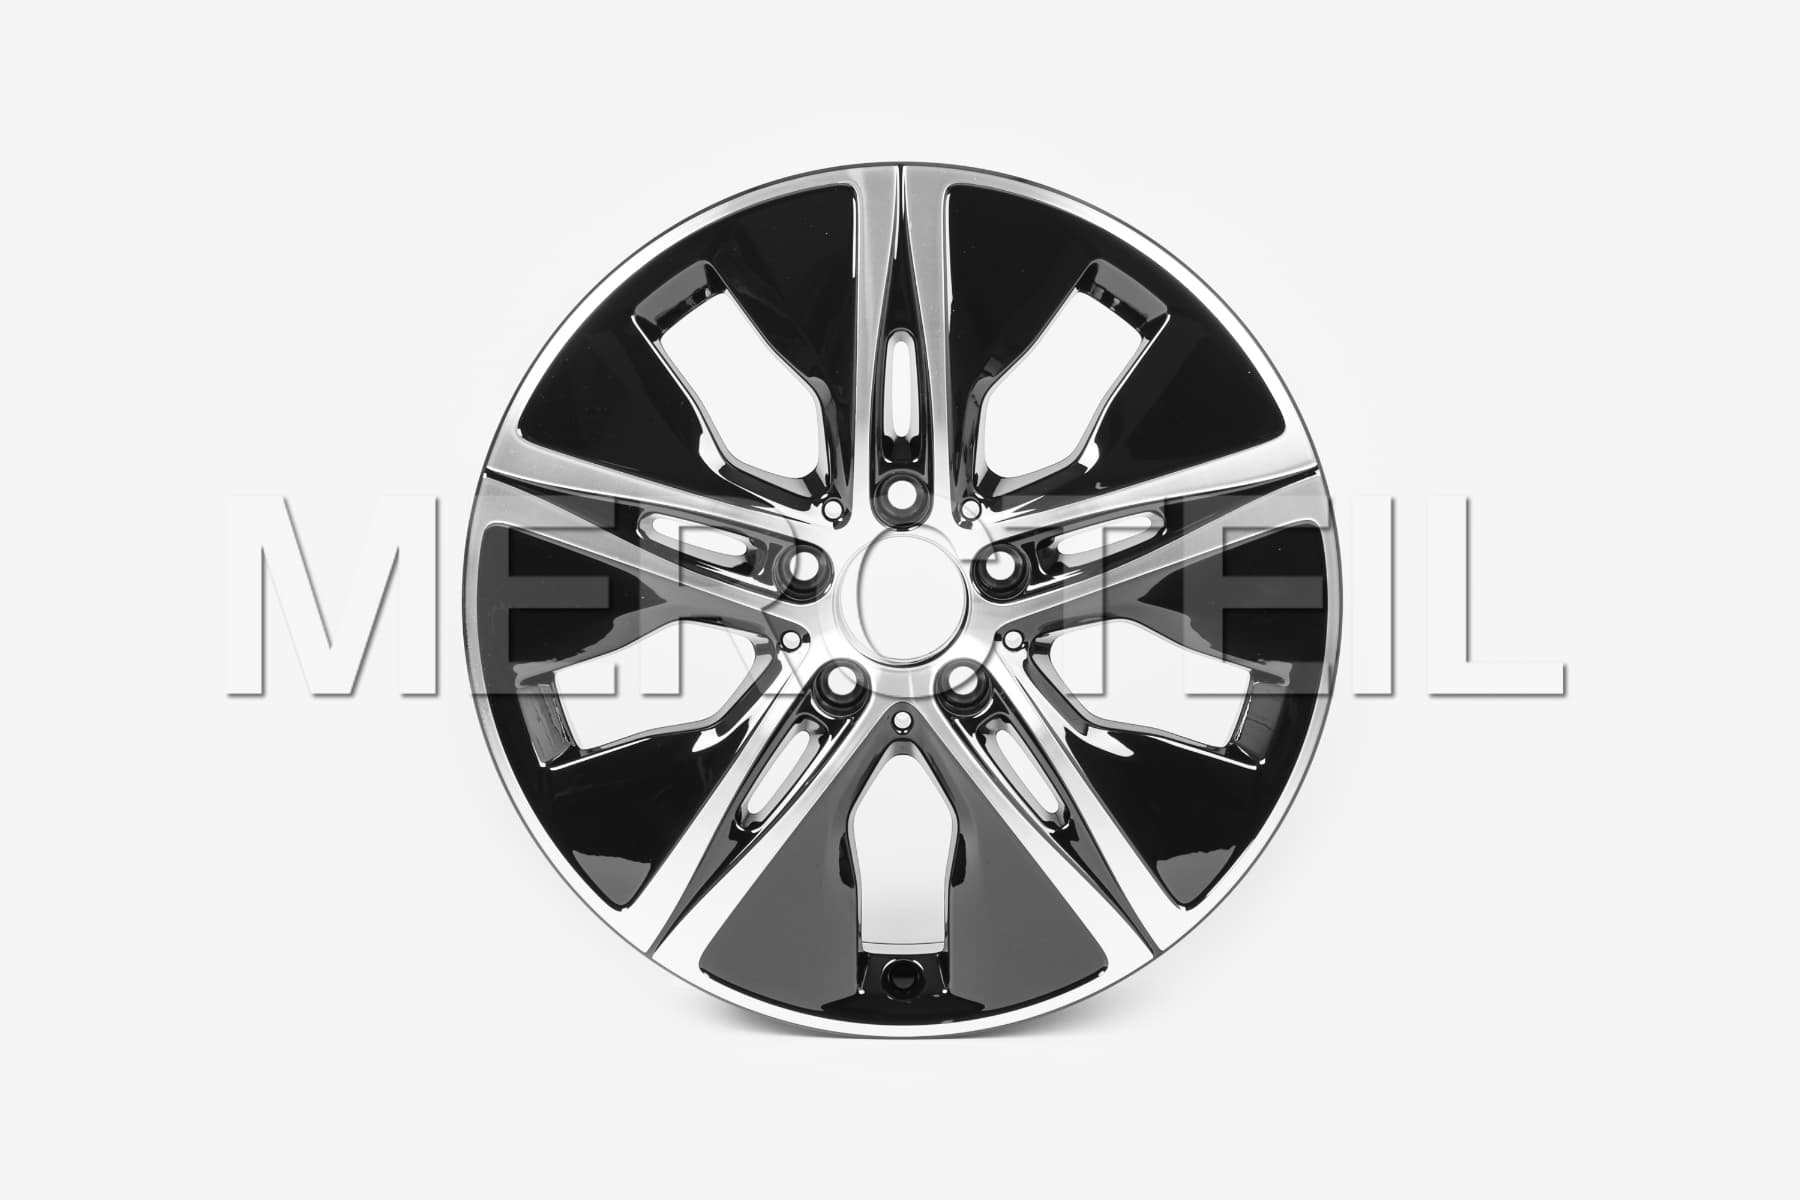 C-Class 5 Hole Alloy Wheels 17 Inch Genuine Mercedes-Benz (Part number: A20540190007X23)